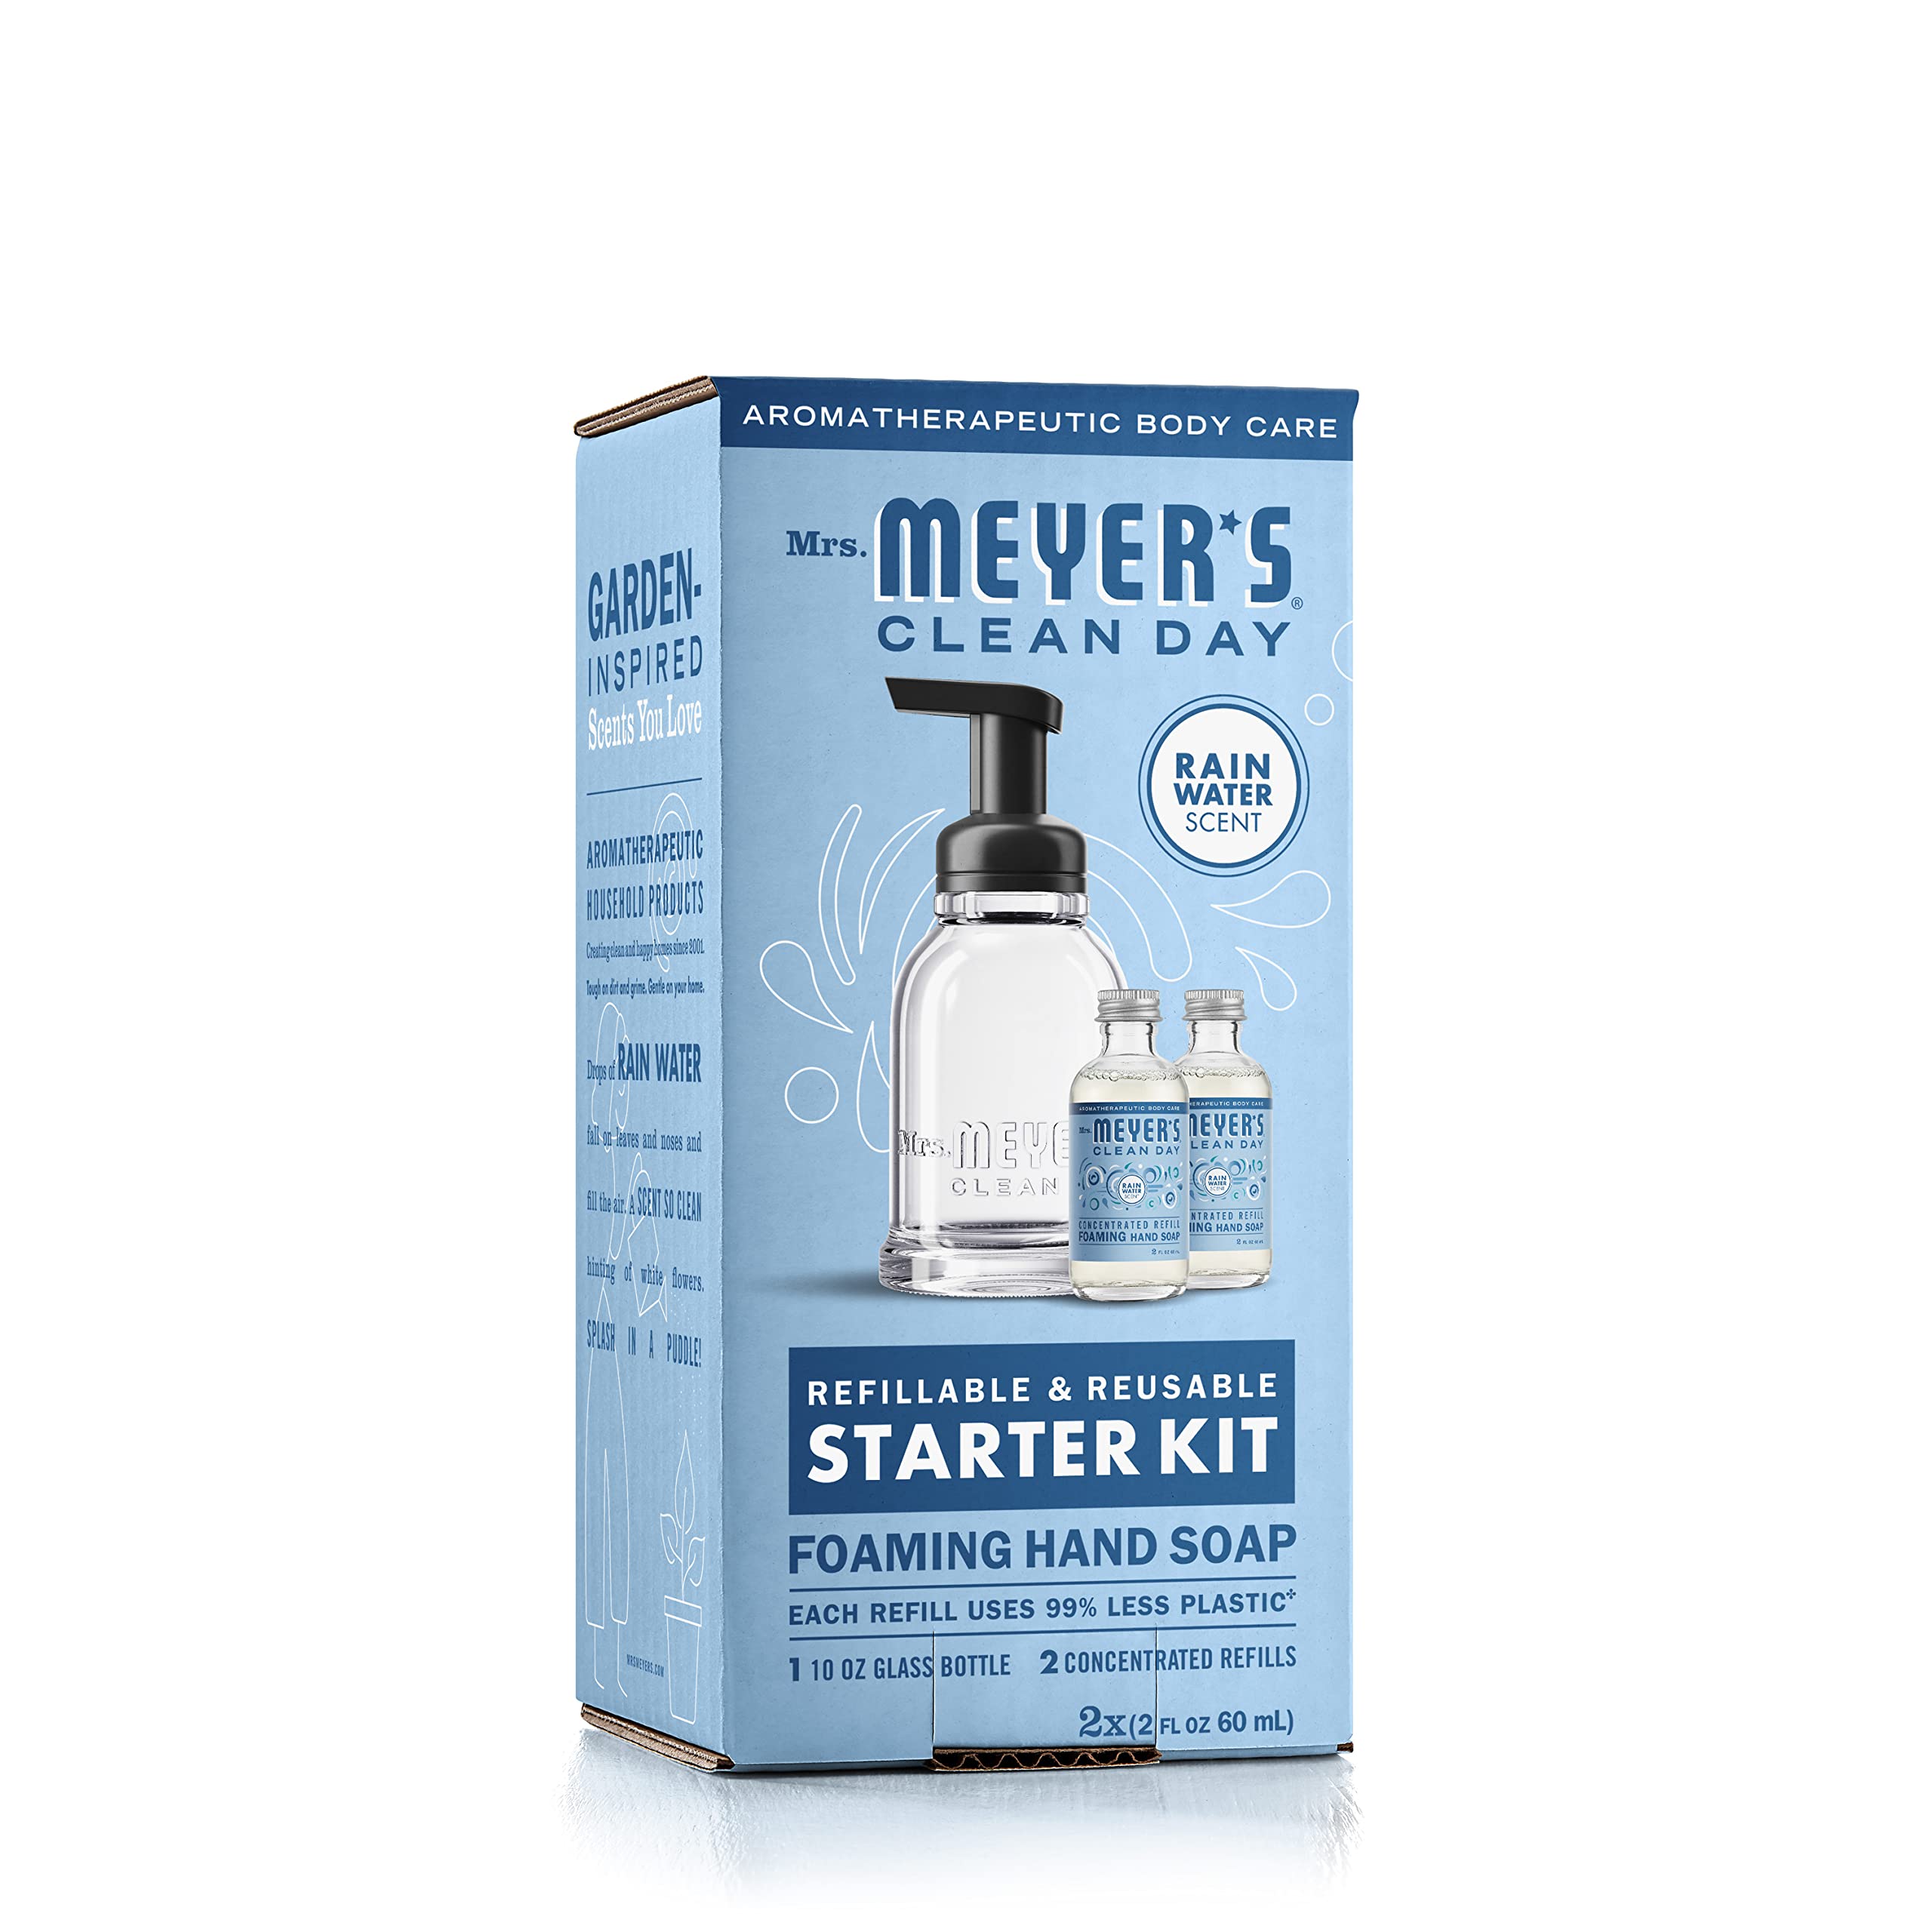 Mrs. Meyer's Foaming Hand Soap Dispenser and Concentrate Starter Kit, 1 Glass Dispenser (10 Fl. Oz.) and 2 Concentrated Refills (2 Fl. Oz. each), Rain Water, Makes 20 Fl. Oz. of Foaming Soap Total